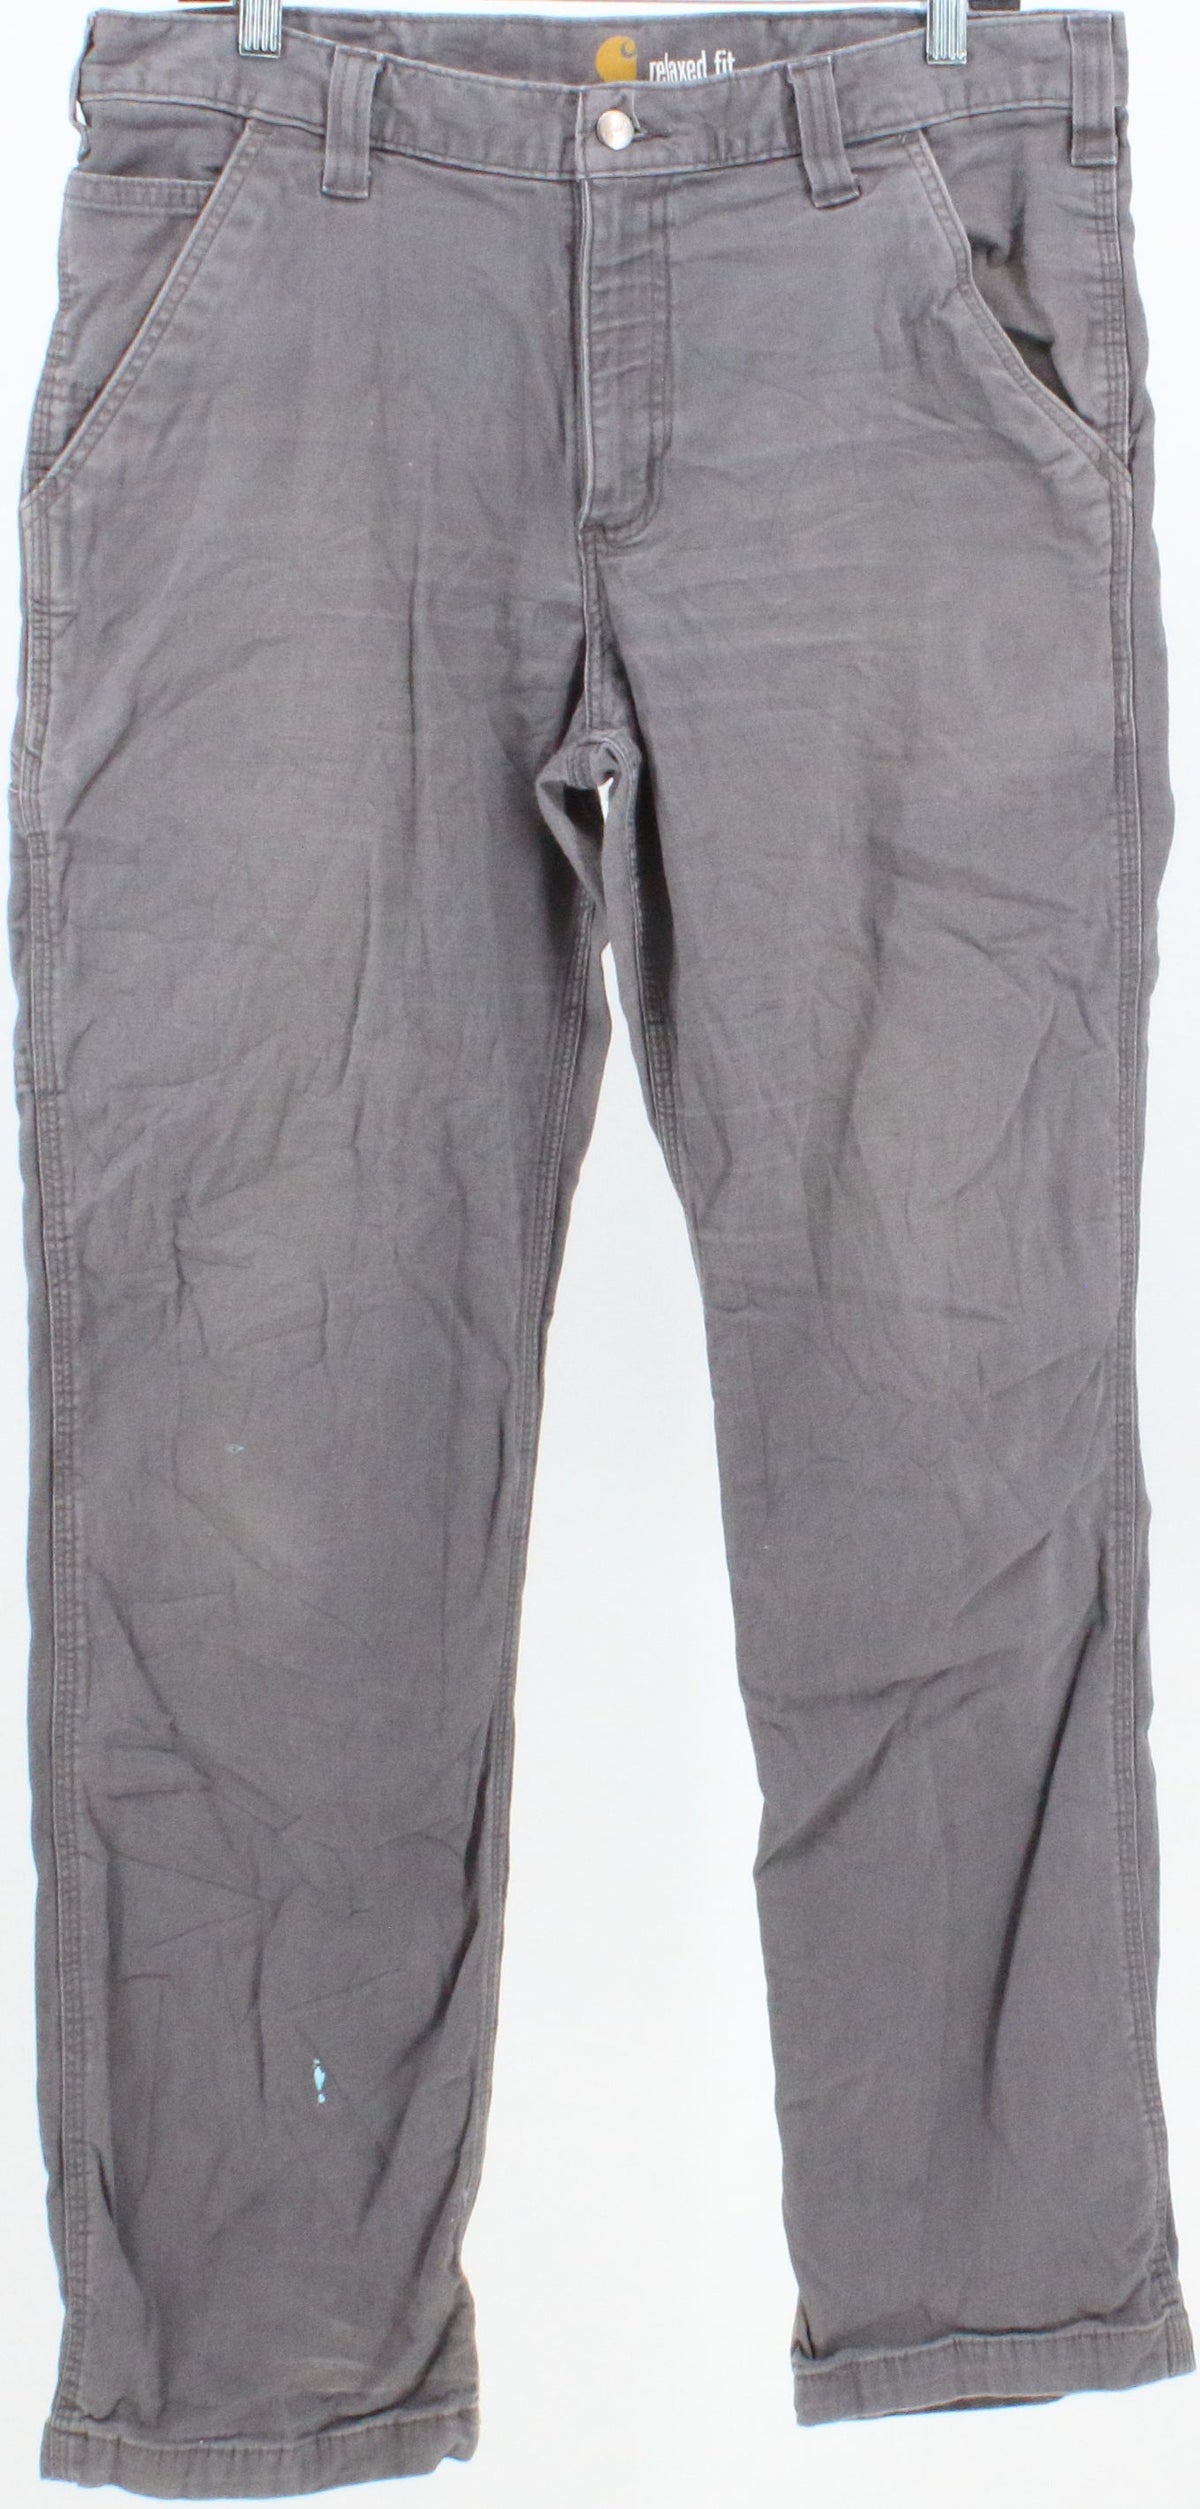 Carhartt Relaxed Fit Grey Cargo Pants